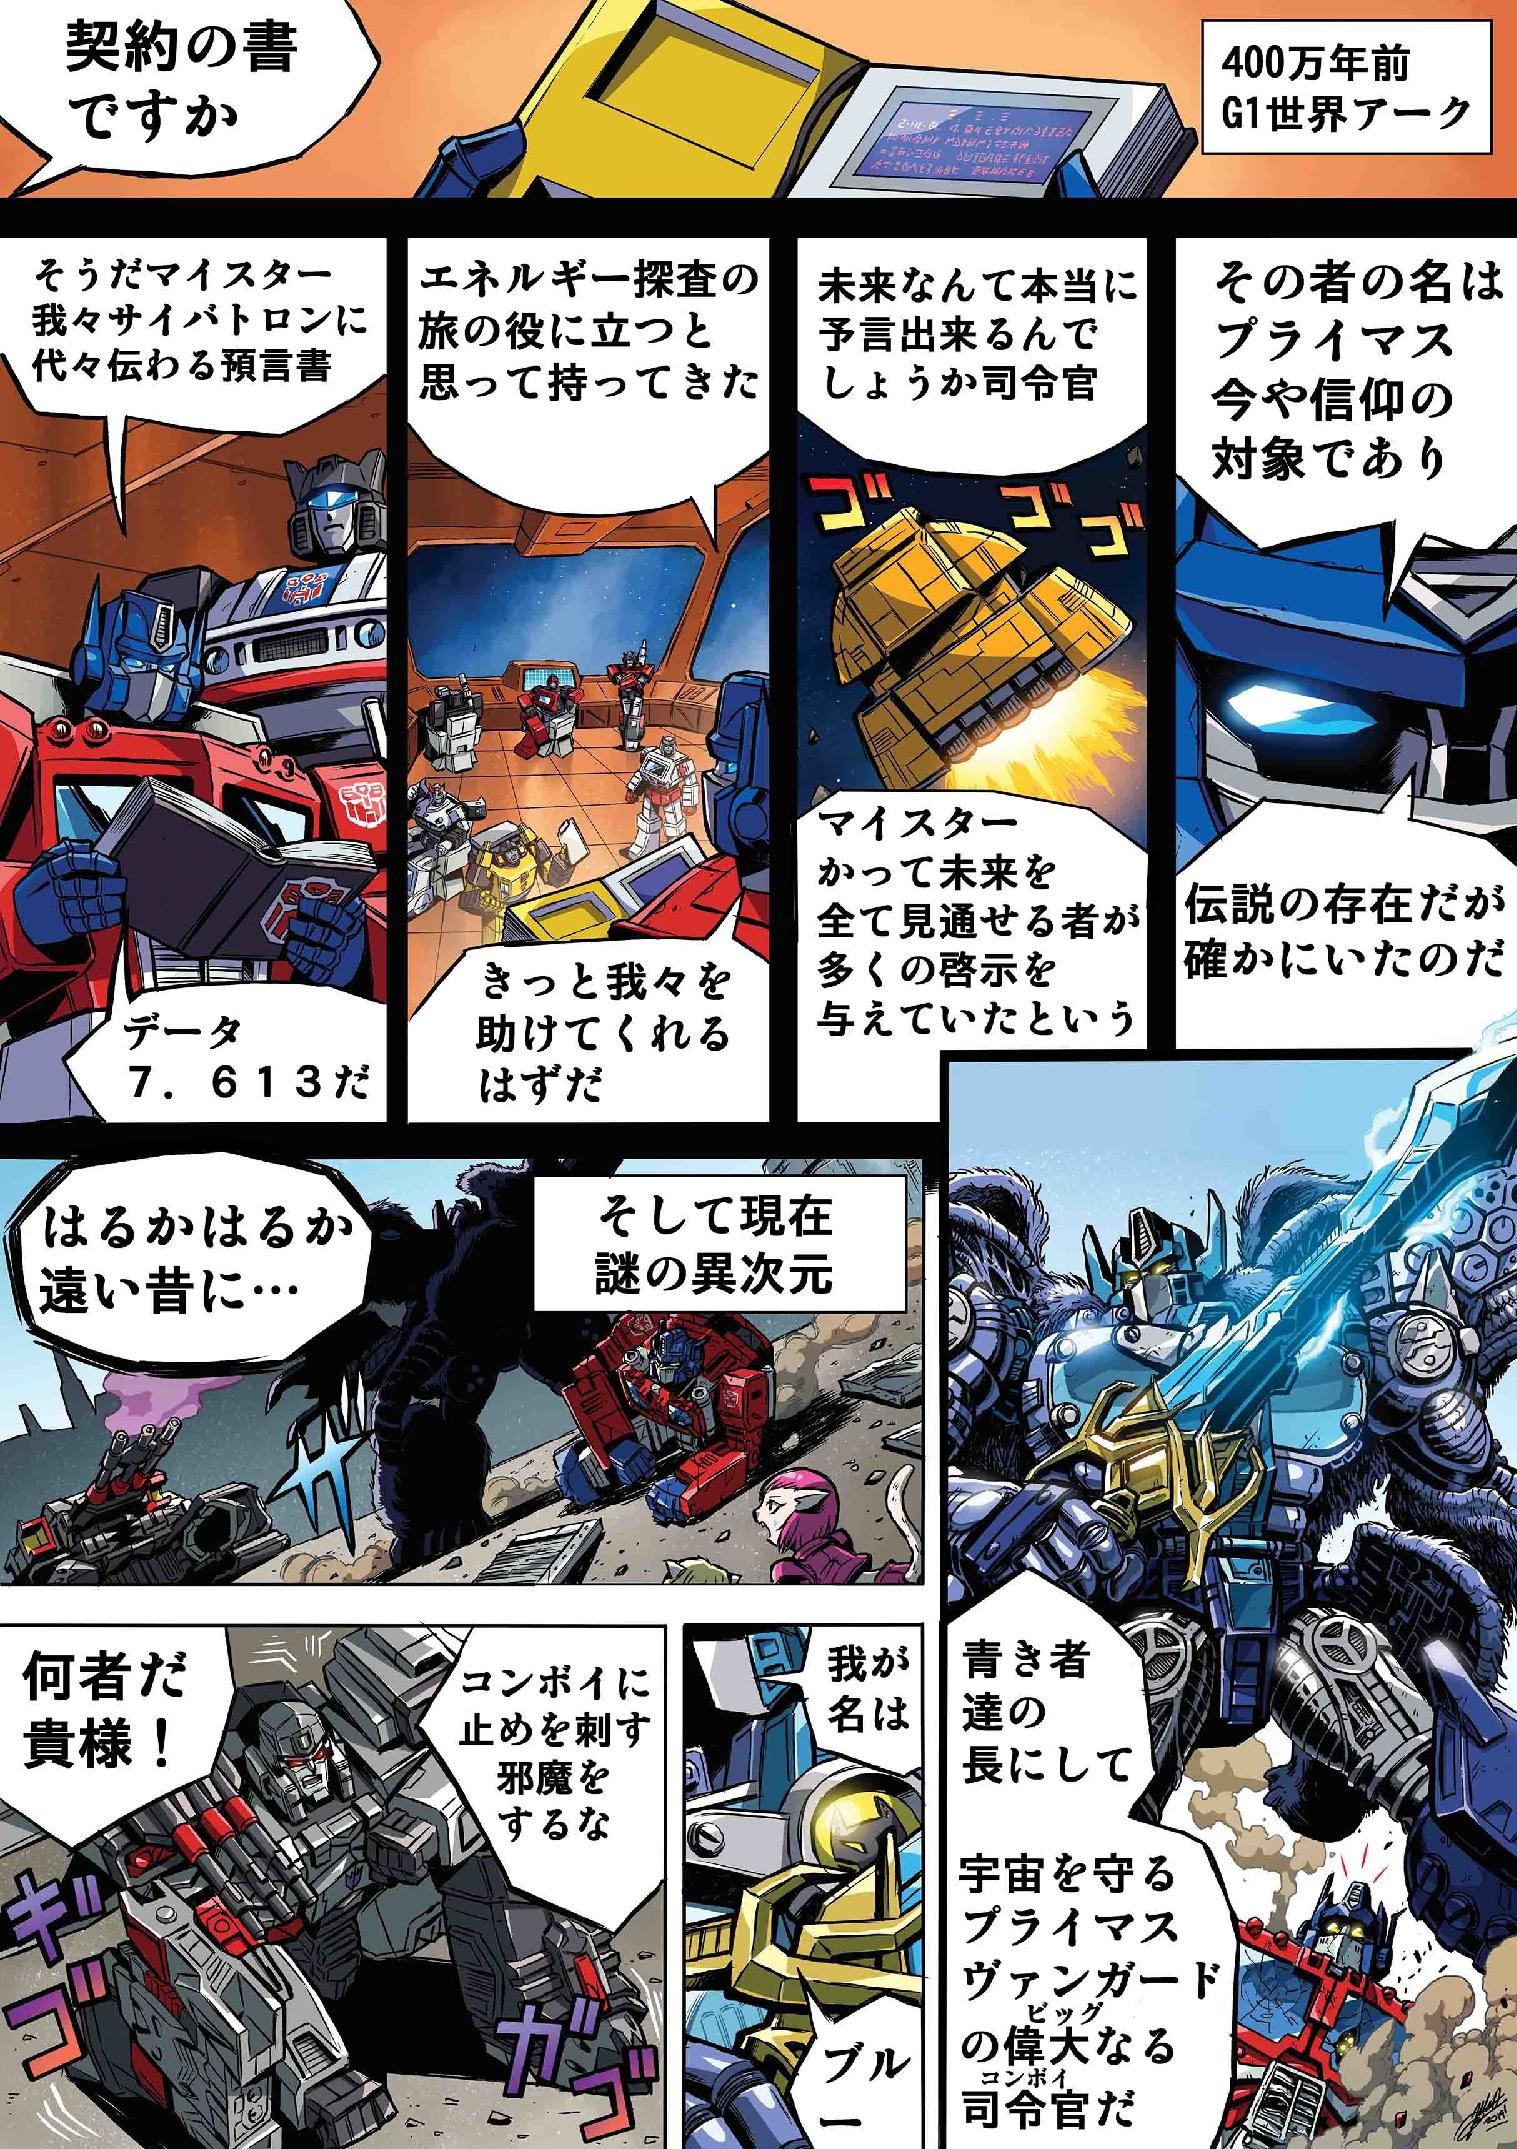 Transformers News: Another Manga Installment Posted Online for Selects Super Megatron